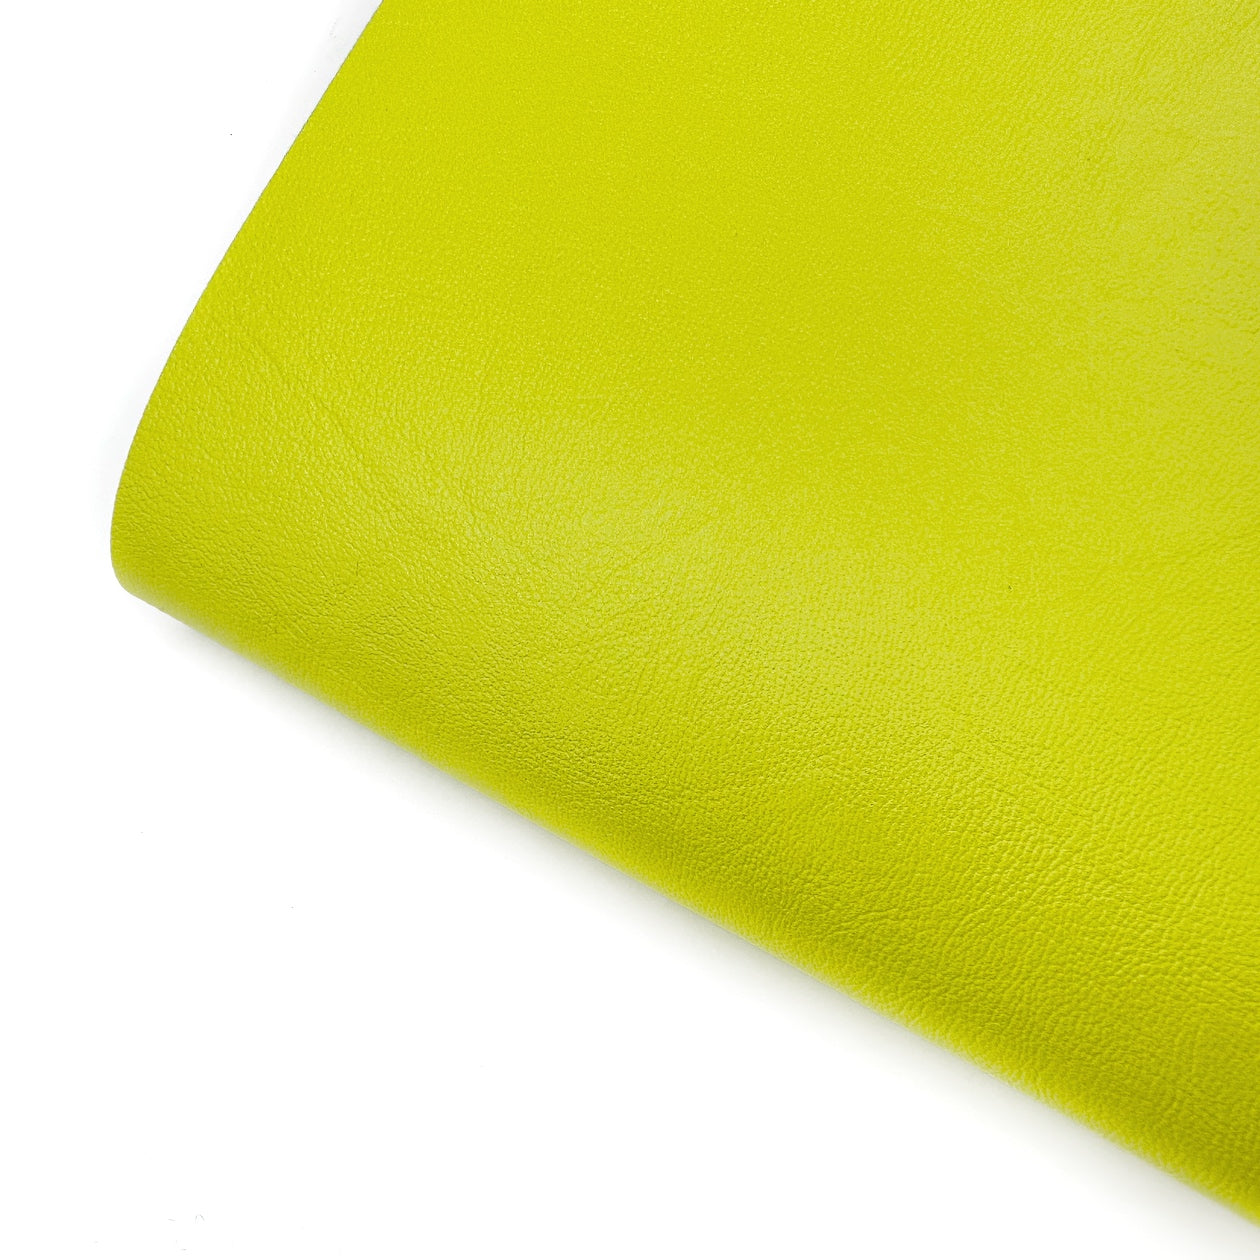 Roller Doll Yellow core Colour Premium Faux Leather Fabric Sheets